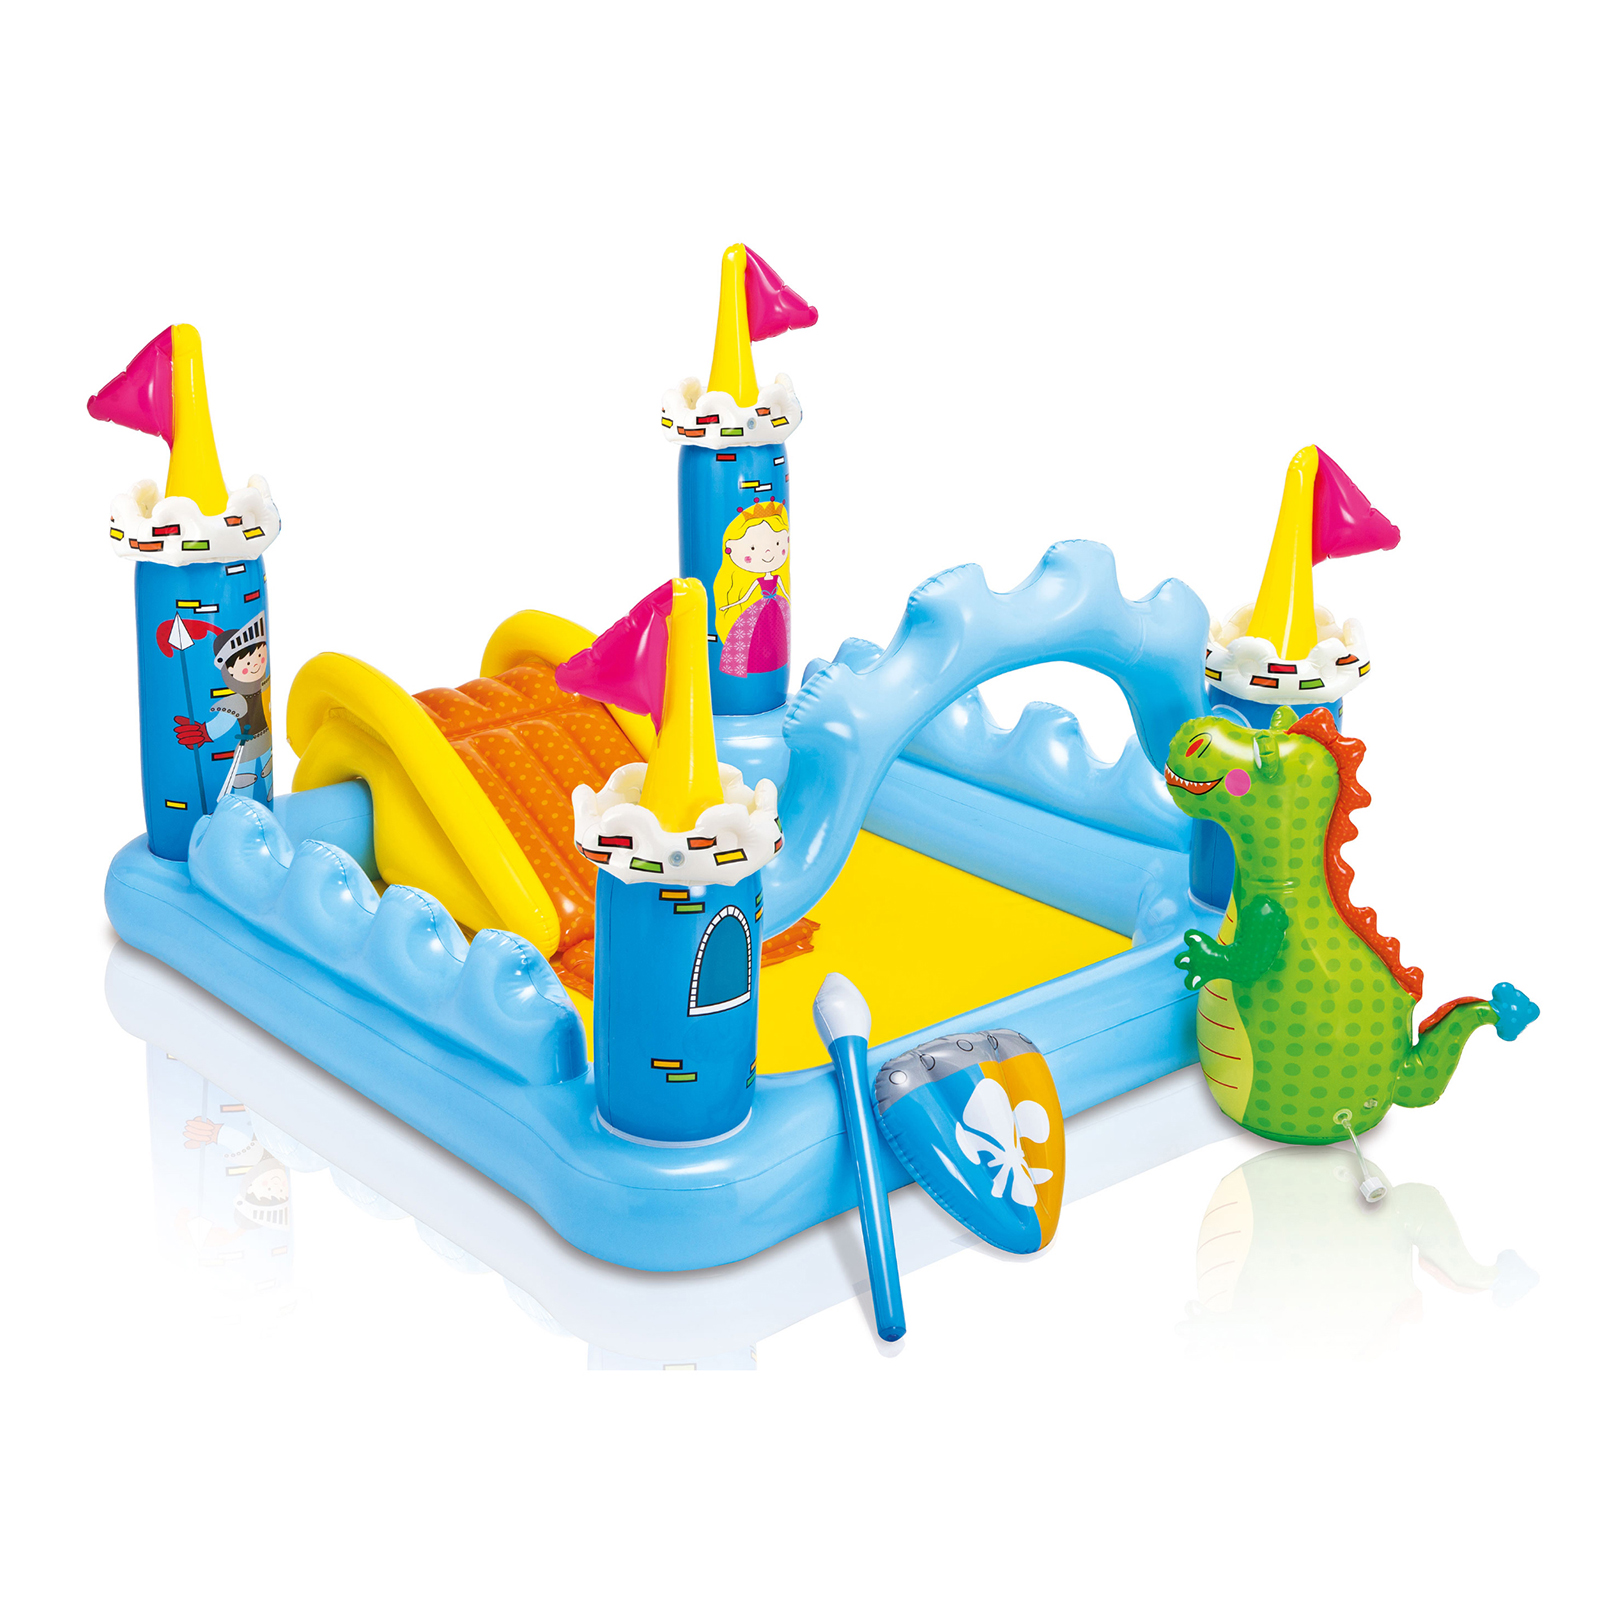 Intex Fantasy Castle Pool and Play Center